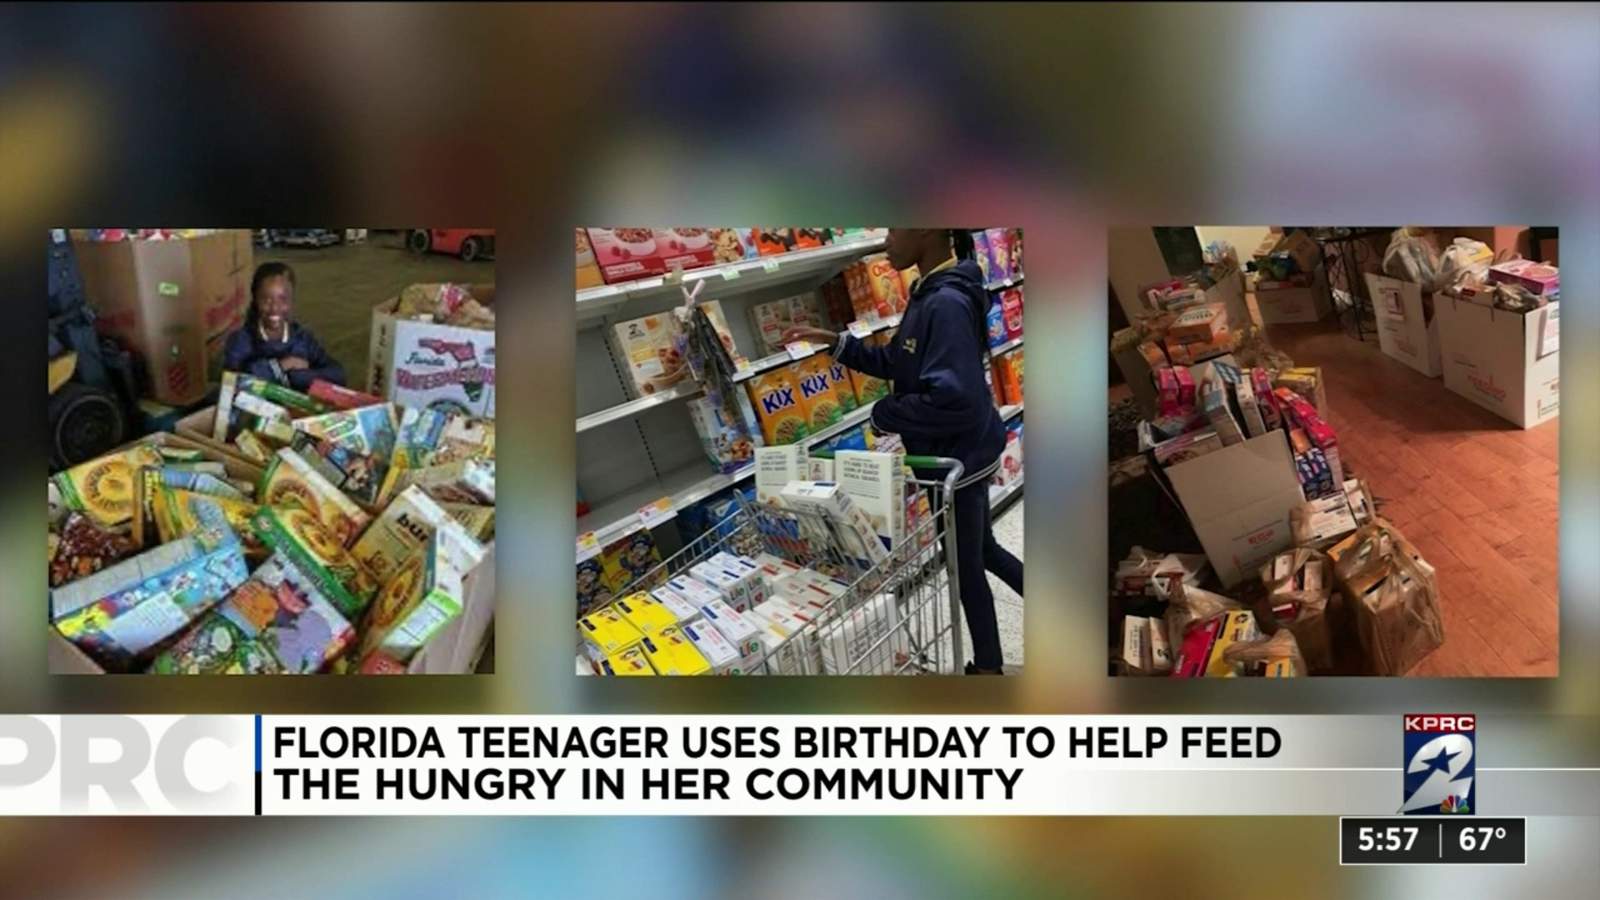 One Good Thing: Teenager uses birthday to help feed the hungry in her community